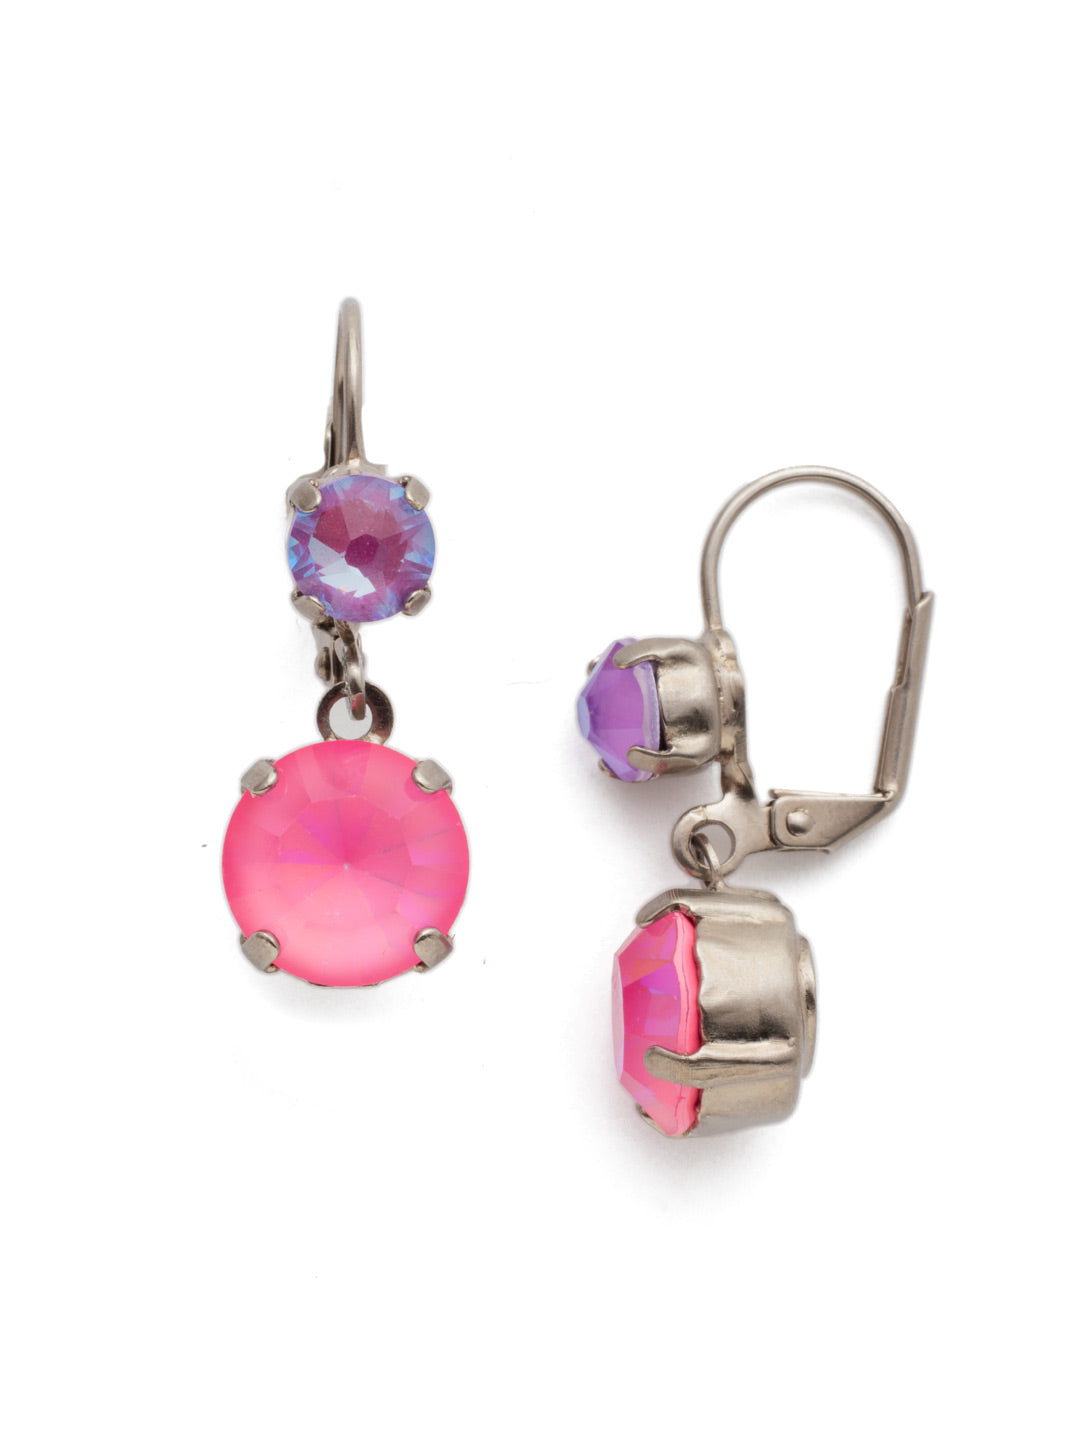 Rosalee Dangle Earring - EEP53ASETP - The Rosalee French Wire Stud Earrings are just the pair when you want to give your outfit, and attitude, a little lift. Just the right amount of sparkle in the set of crystals is sure to make you - and onlookers - smile. From Sorrelli's Electric Pink collection in our Antique Silver-tone finish.